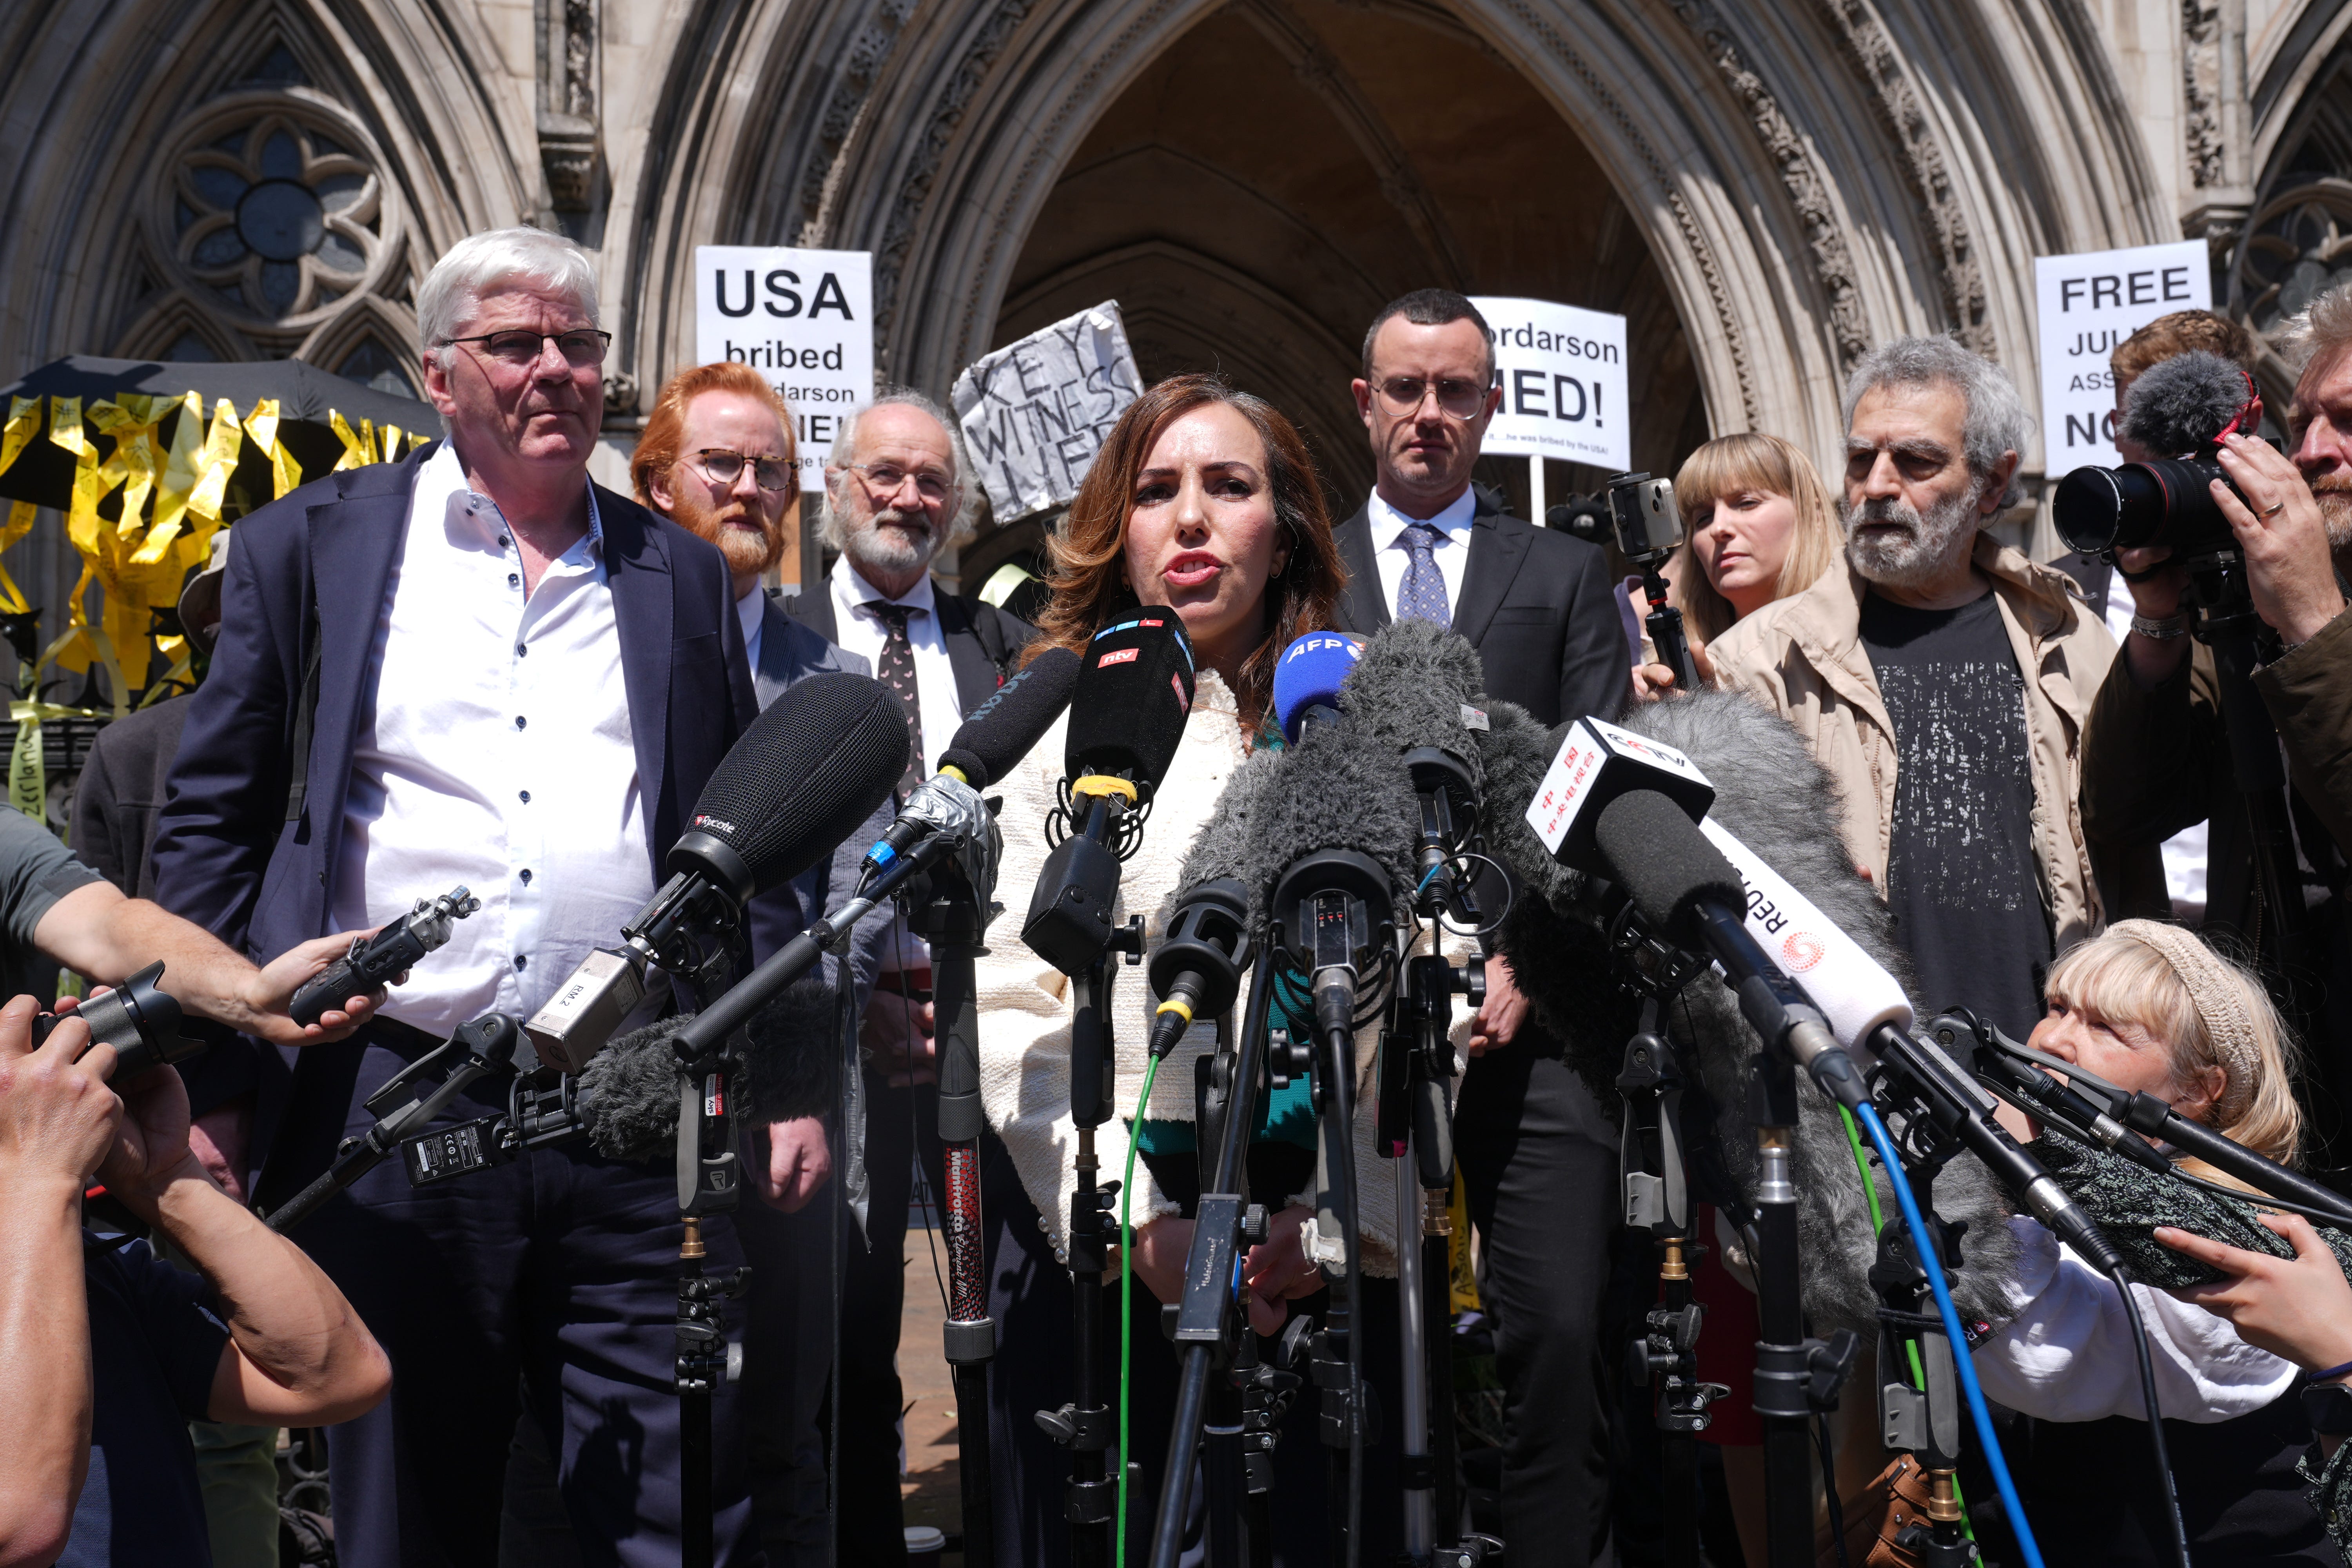 Stella Assange, the wife of Julian Assange, gives a statement outside the Royal Courts of Justice in London after her husband won a bid at the High Court to bring an appeal against his extradition to the US